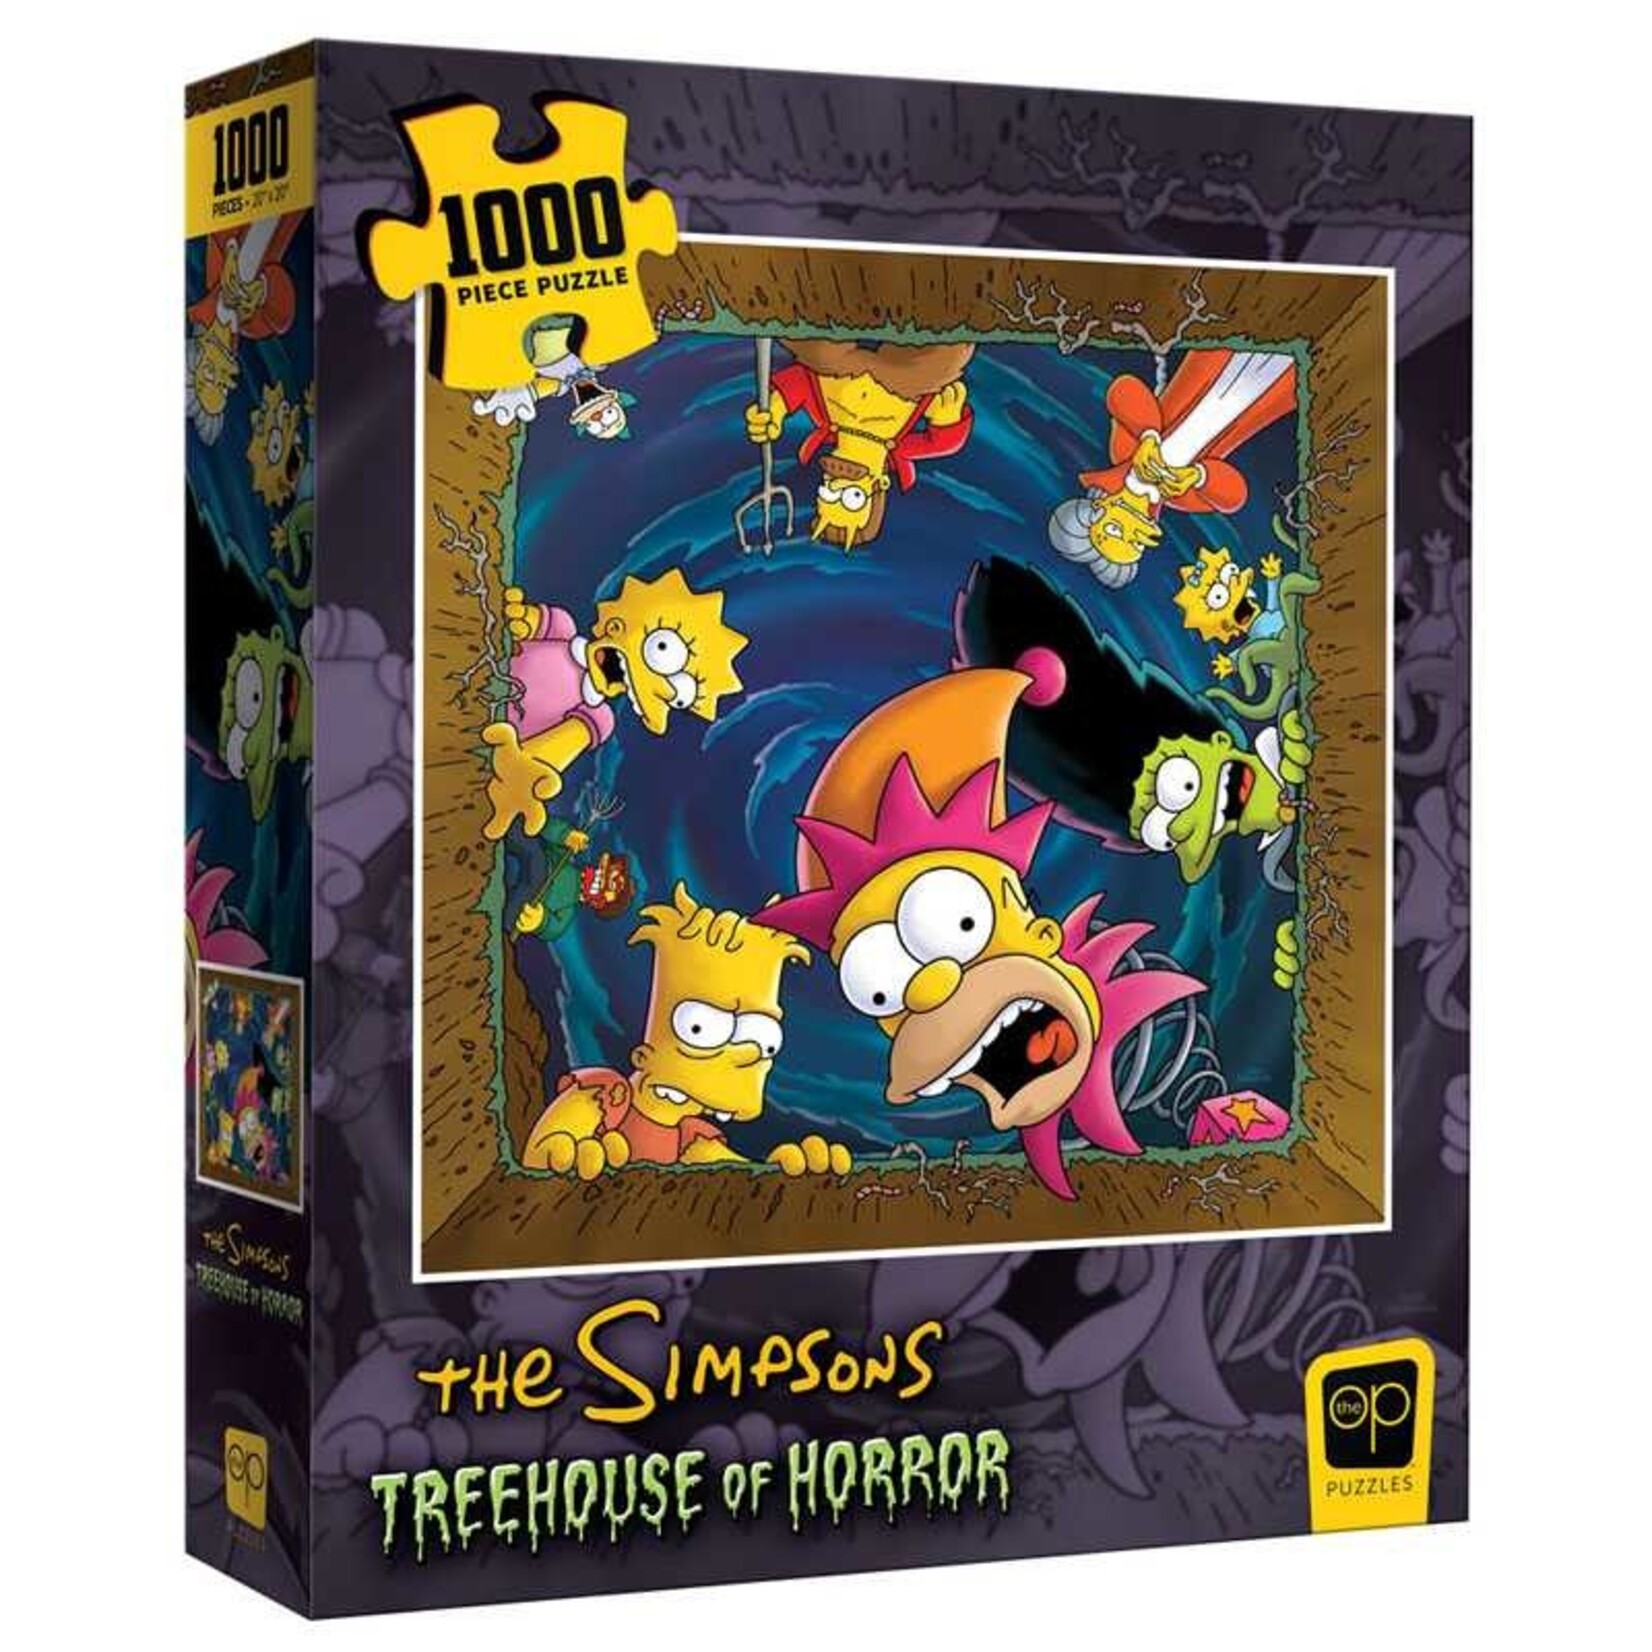 USAopoly USAopoly 1000 - The Simpsons : Treehouse of Horror "Happy Haunting"